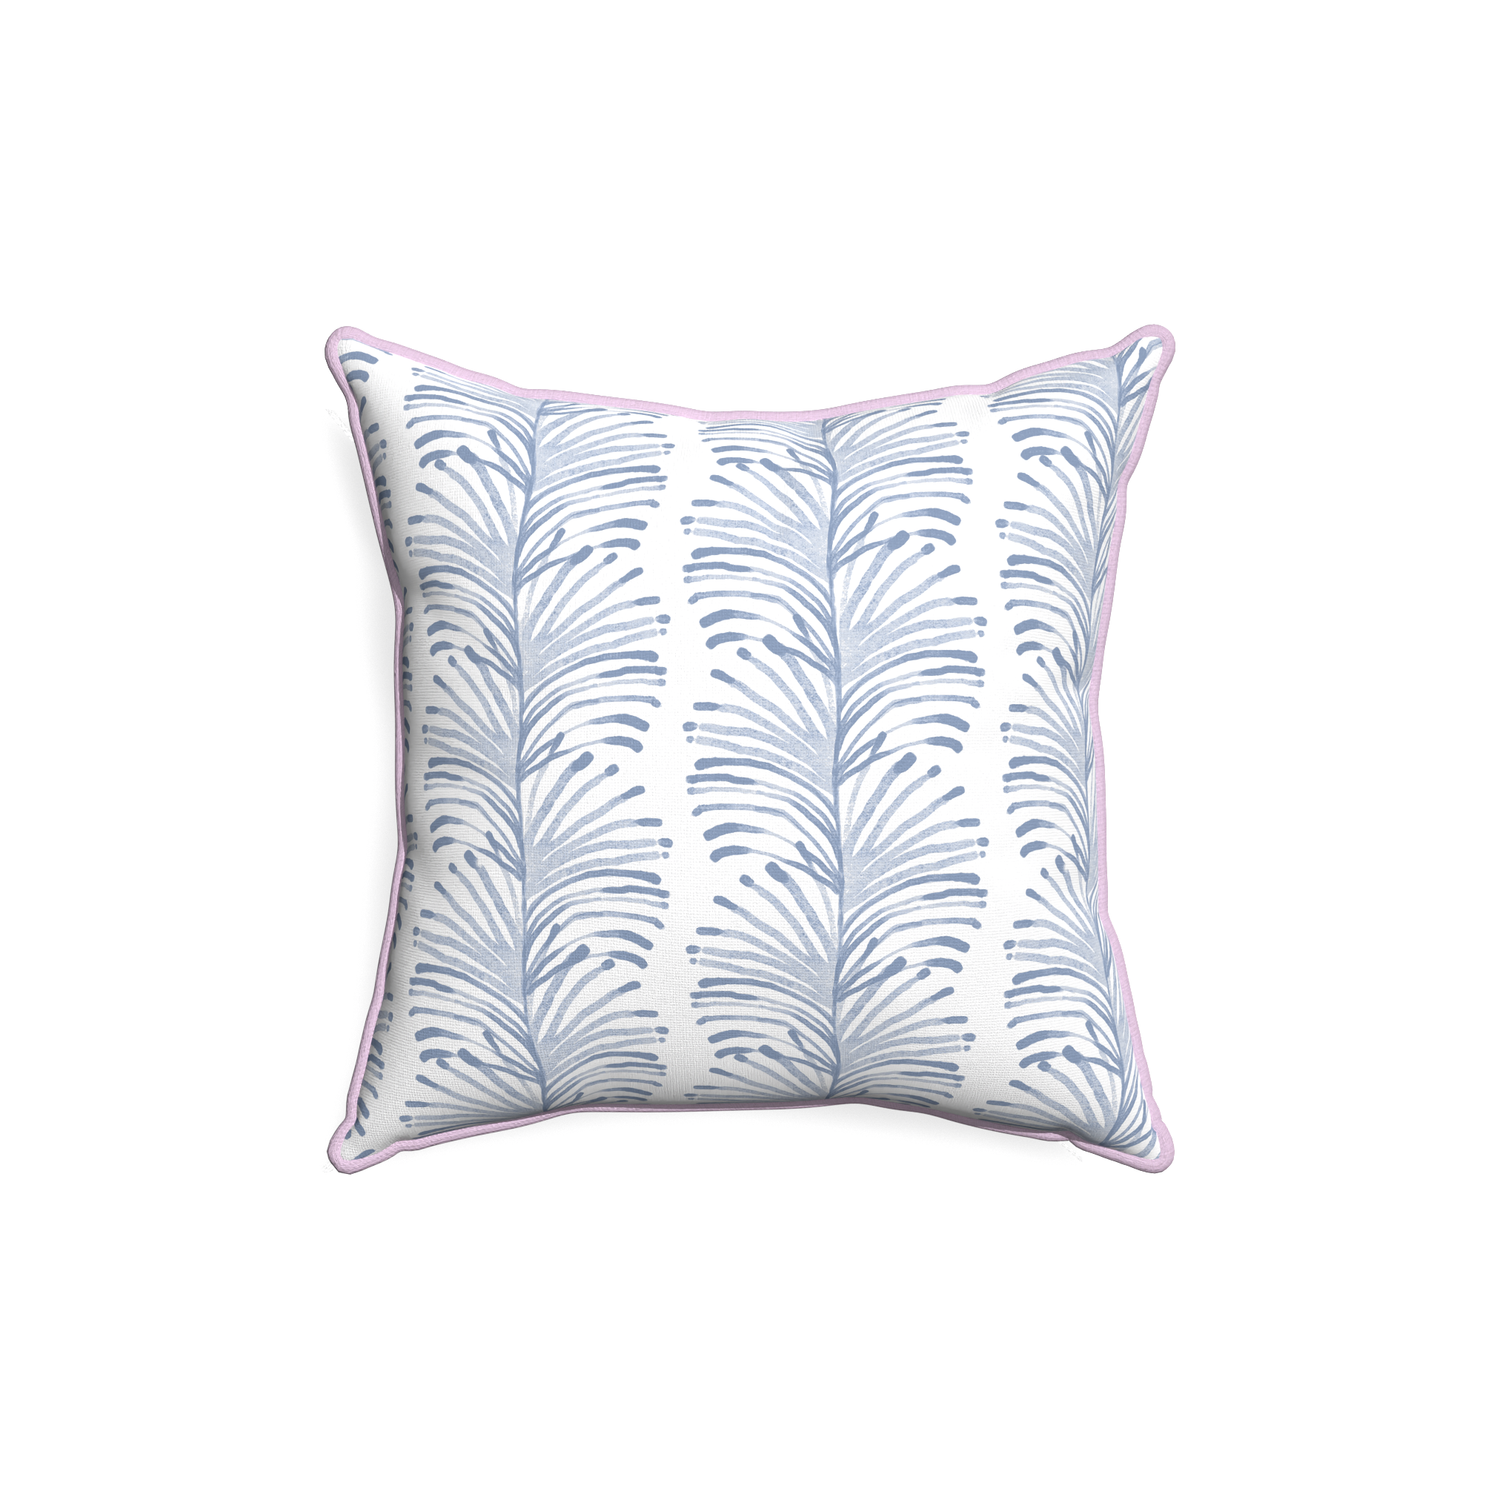 18-square emma sky custom sky blue botanical stripepillow with l piping on white background